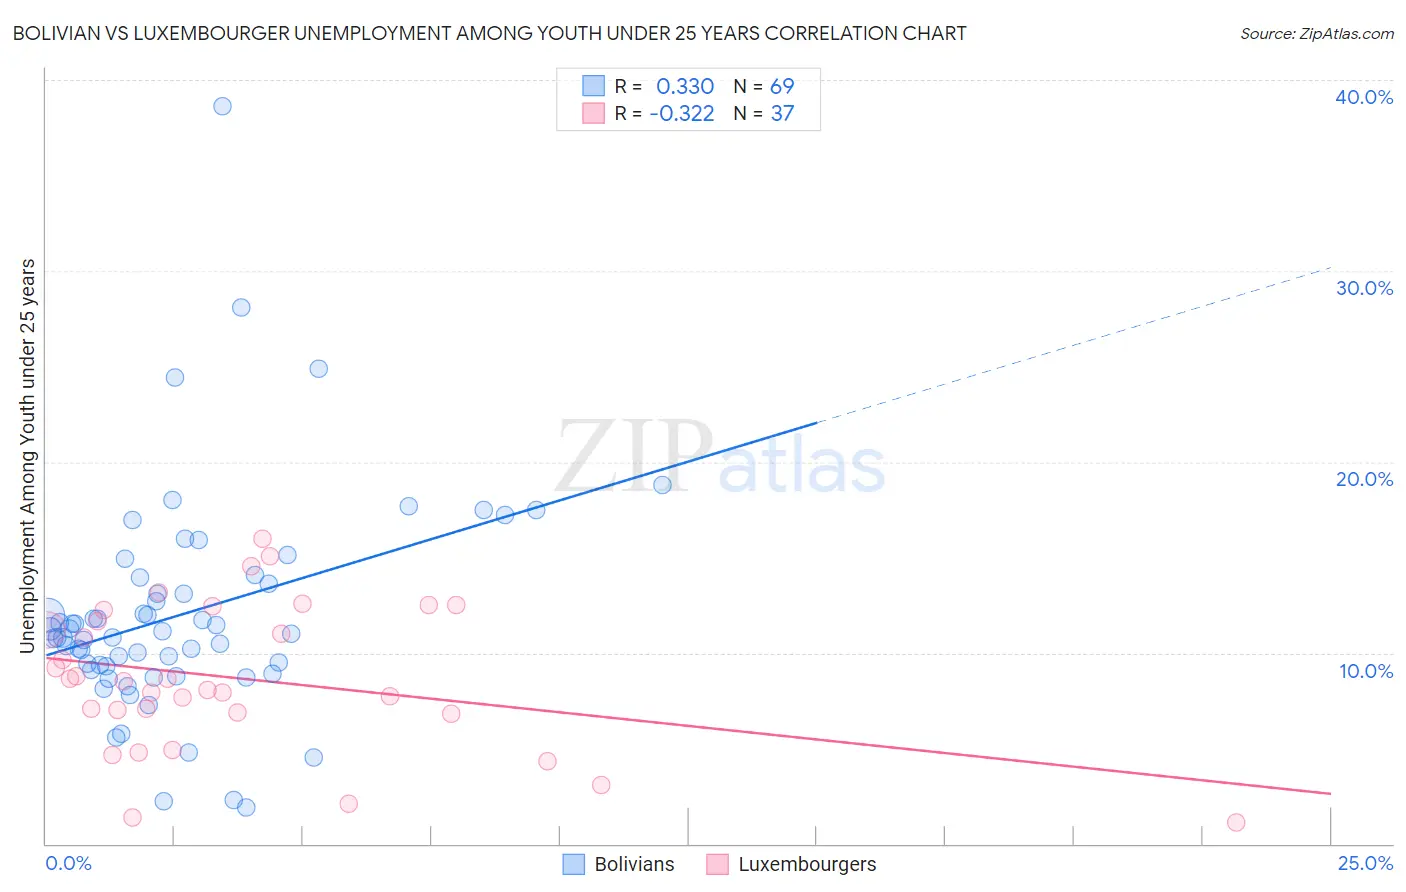 Bolivian vs Luxembourger Unemployment Among Youth under 25 years